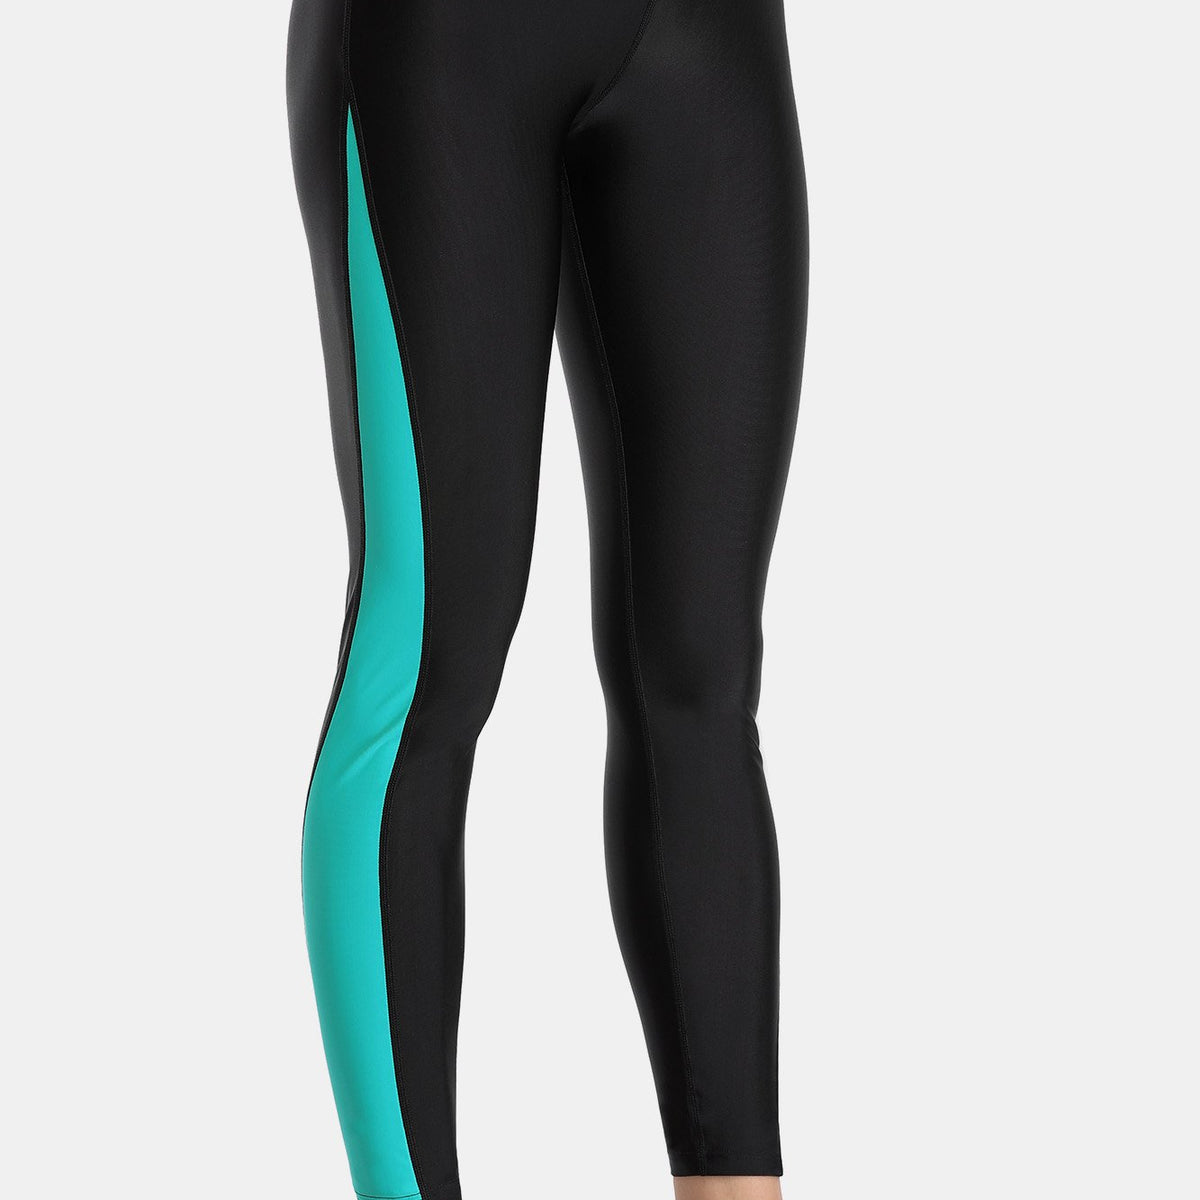  ATTRACO Women's Swimming Pants SPF Swimming Tights Surf Leggings  Aqua Small : Clothing, Shoes & Jewelry